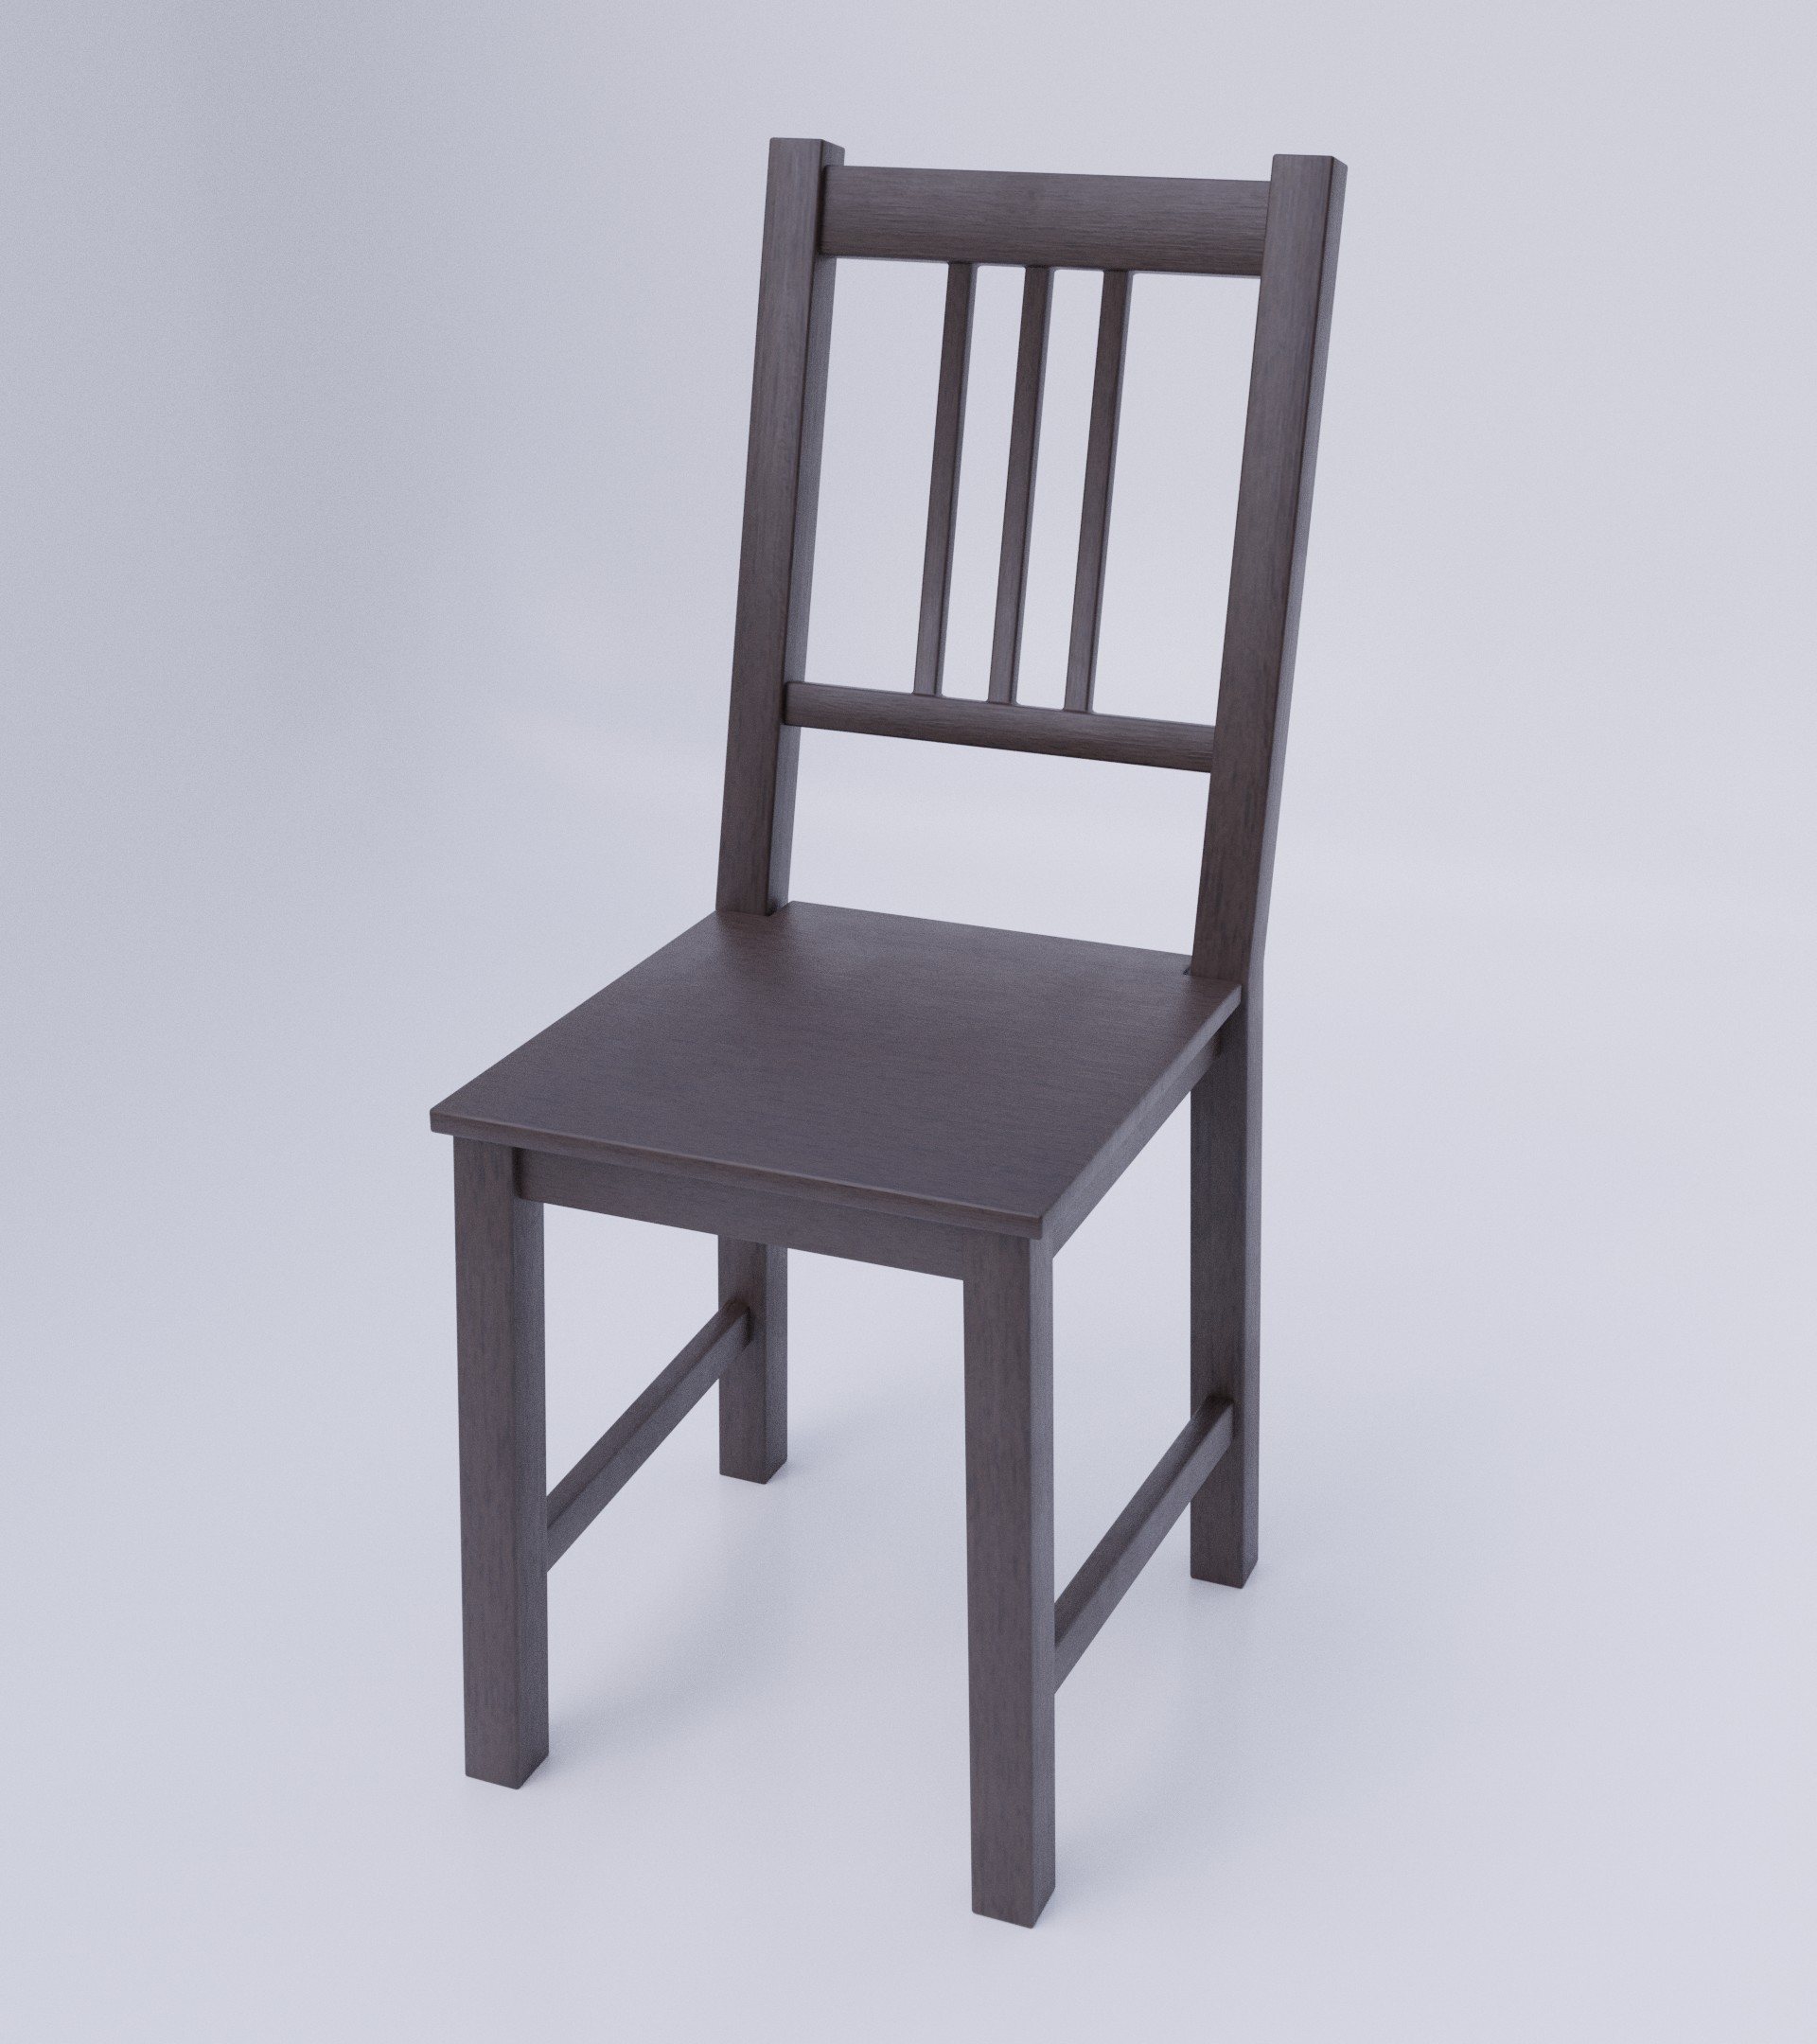 Simple Dark Wood Chair preview image 2